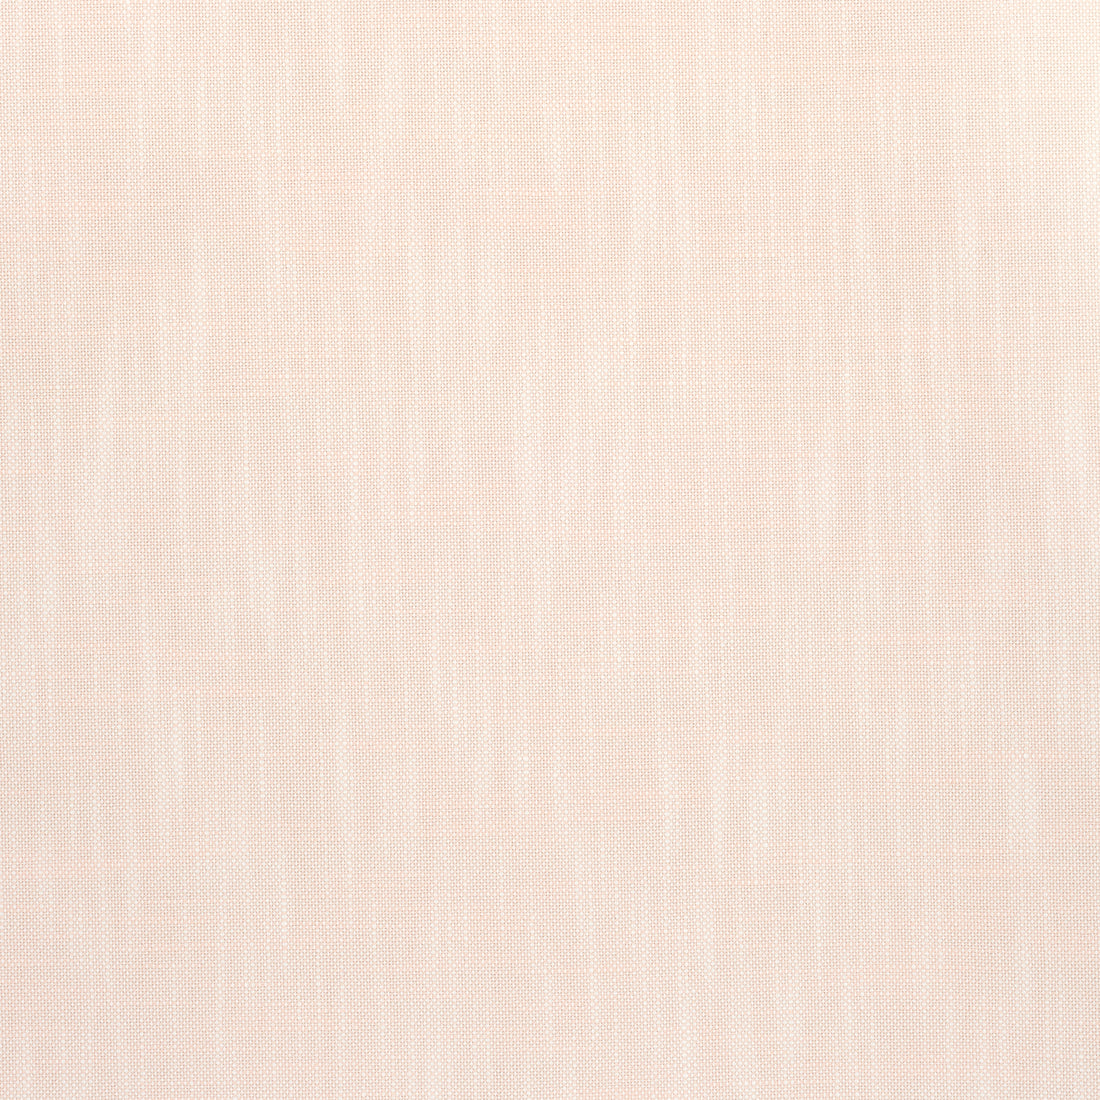 Bristol fabric in blush color - pattern number W73405 - by Thibaut in the Landmark Textures collection